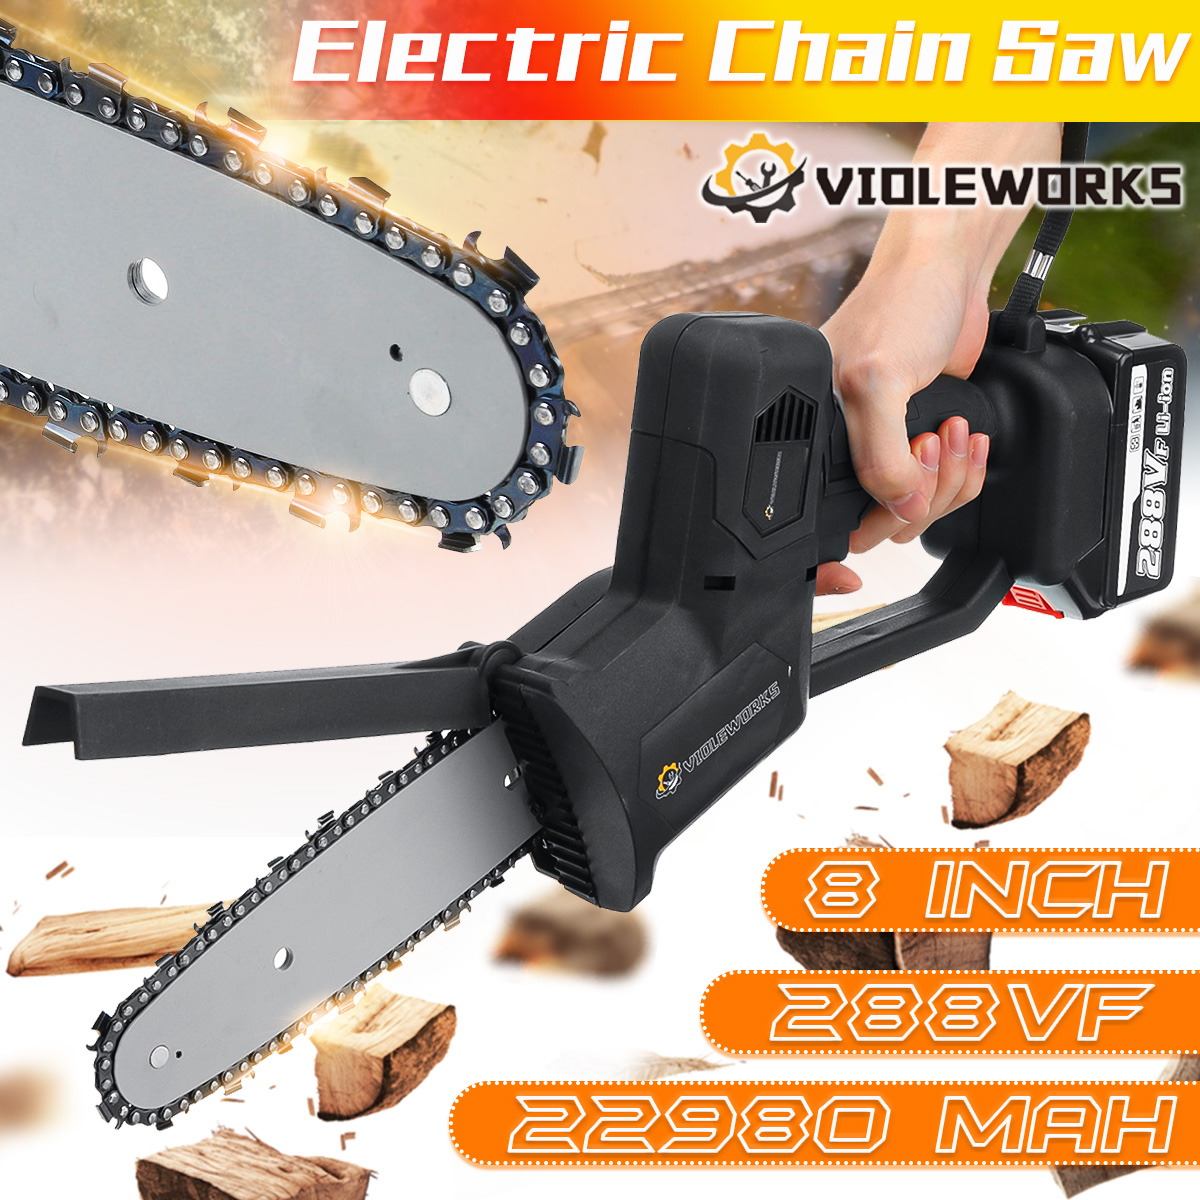 VIOLEWORKS-288VF-Cordless-Electric-Chain-Saw-One-Hand-Saw-Woodworking-Tool-W-None1pc2pcs-Battery-Als-1829028-1